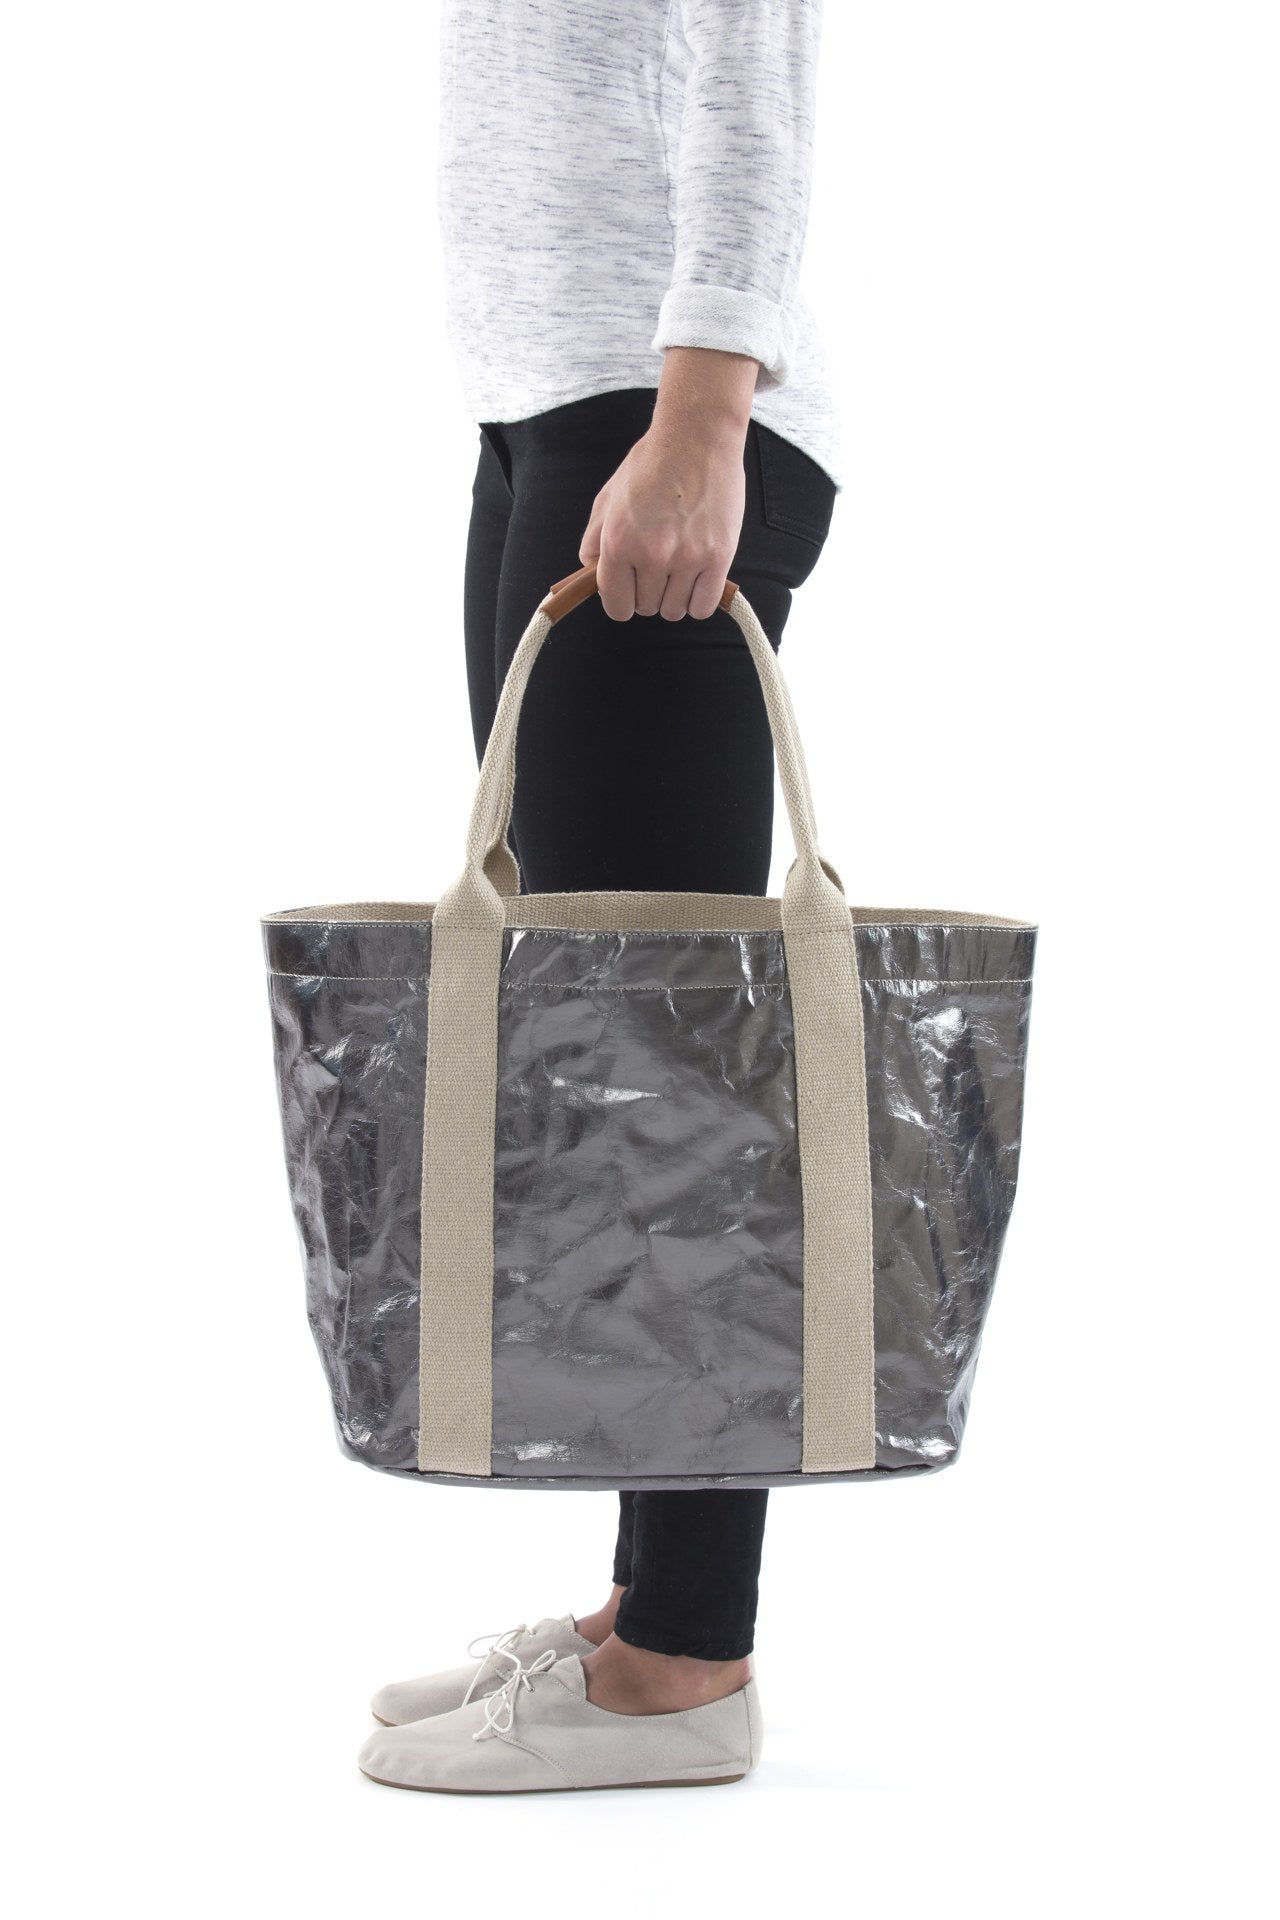 A woman in casual clothing is shown holding a metallic dark silver washable paper tote bag with two beige cotton canvas top handles.